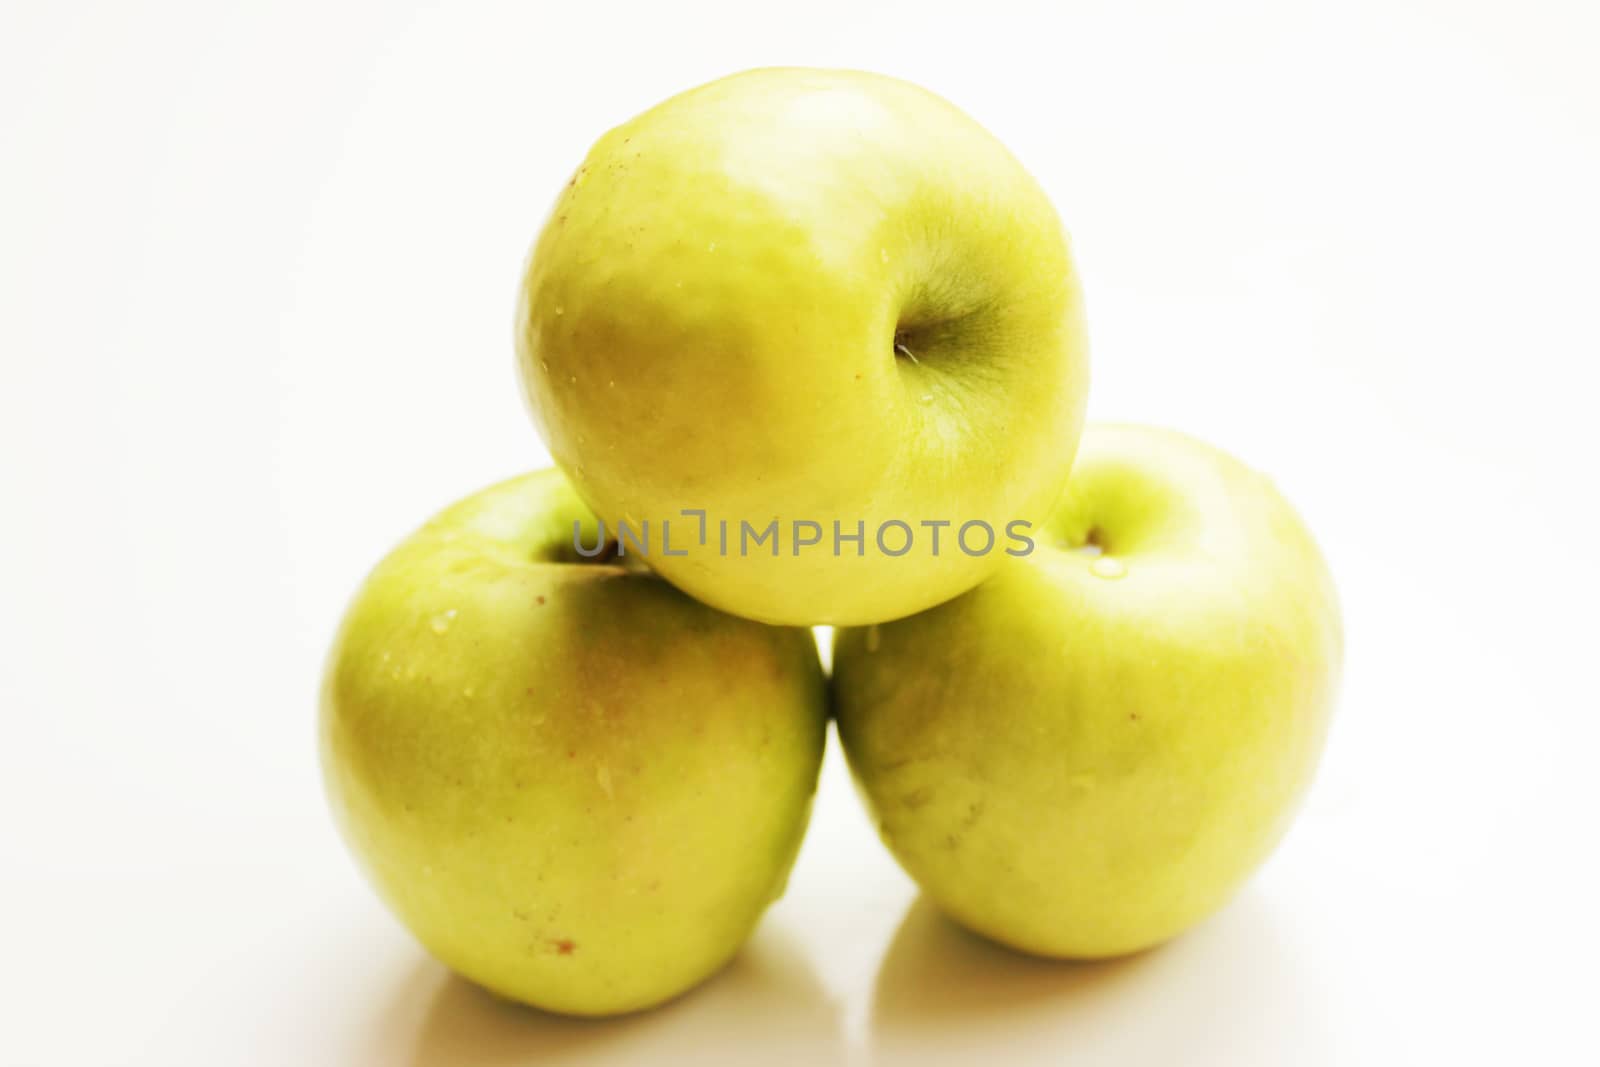 Fresh delicious looking green apples.